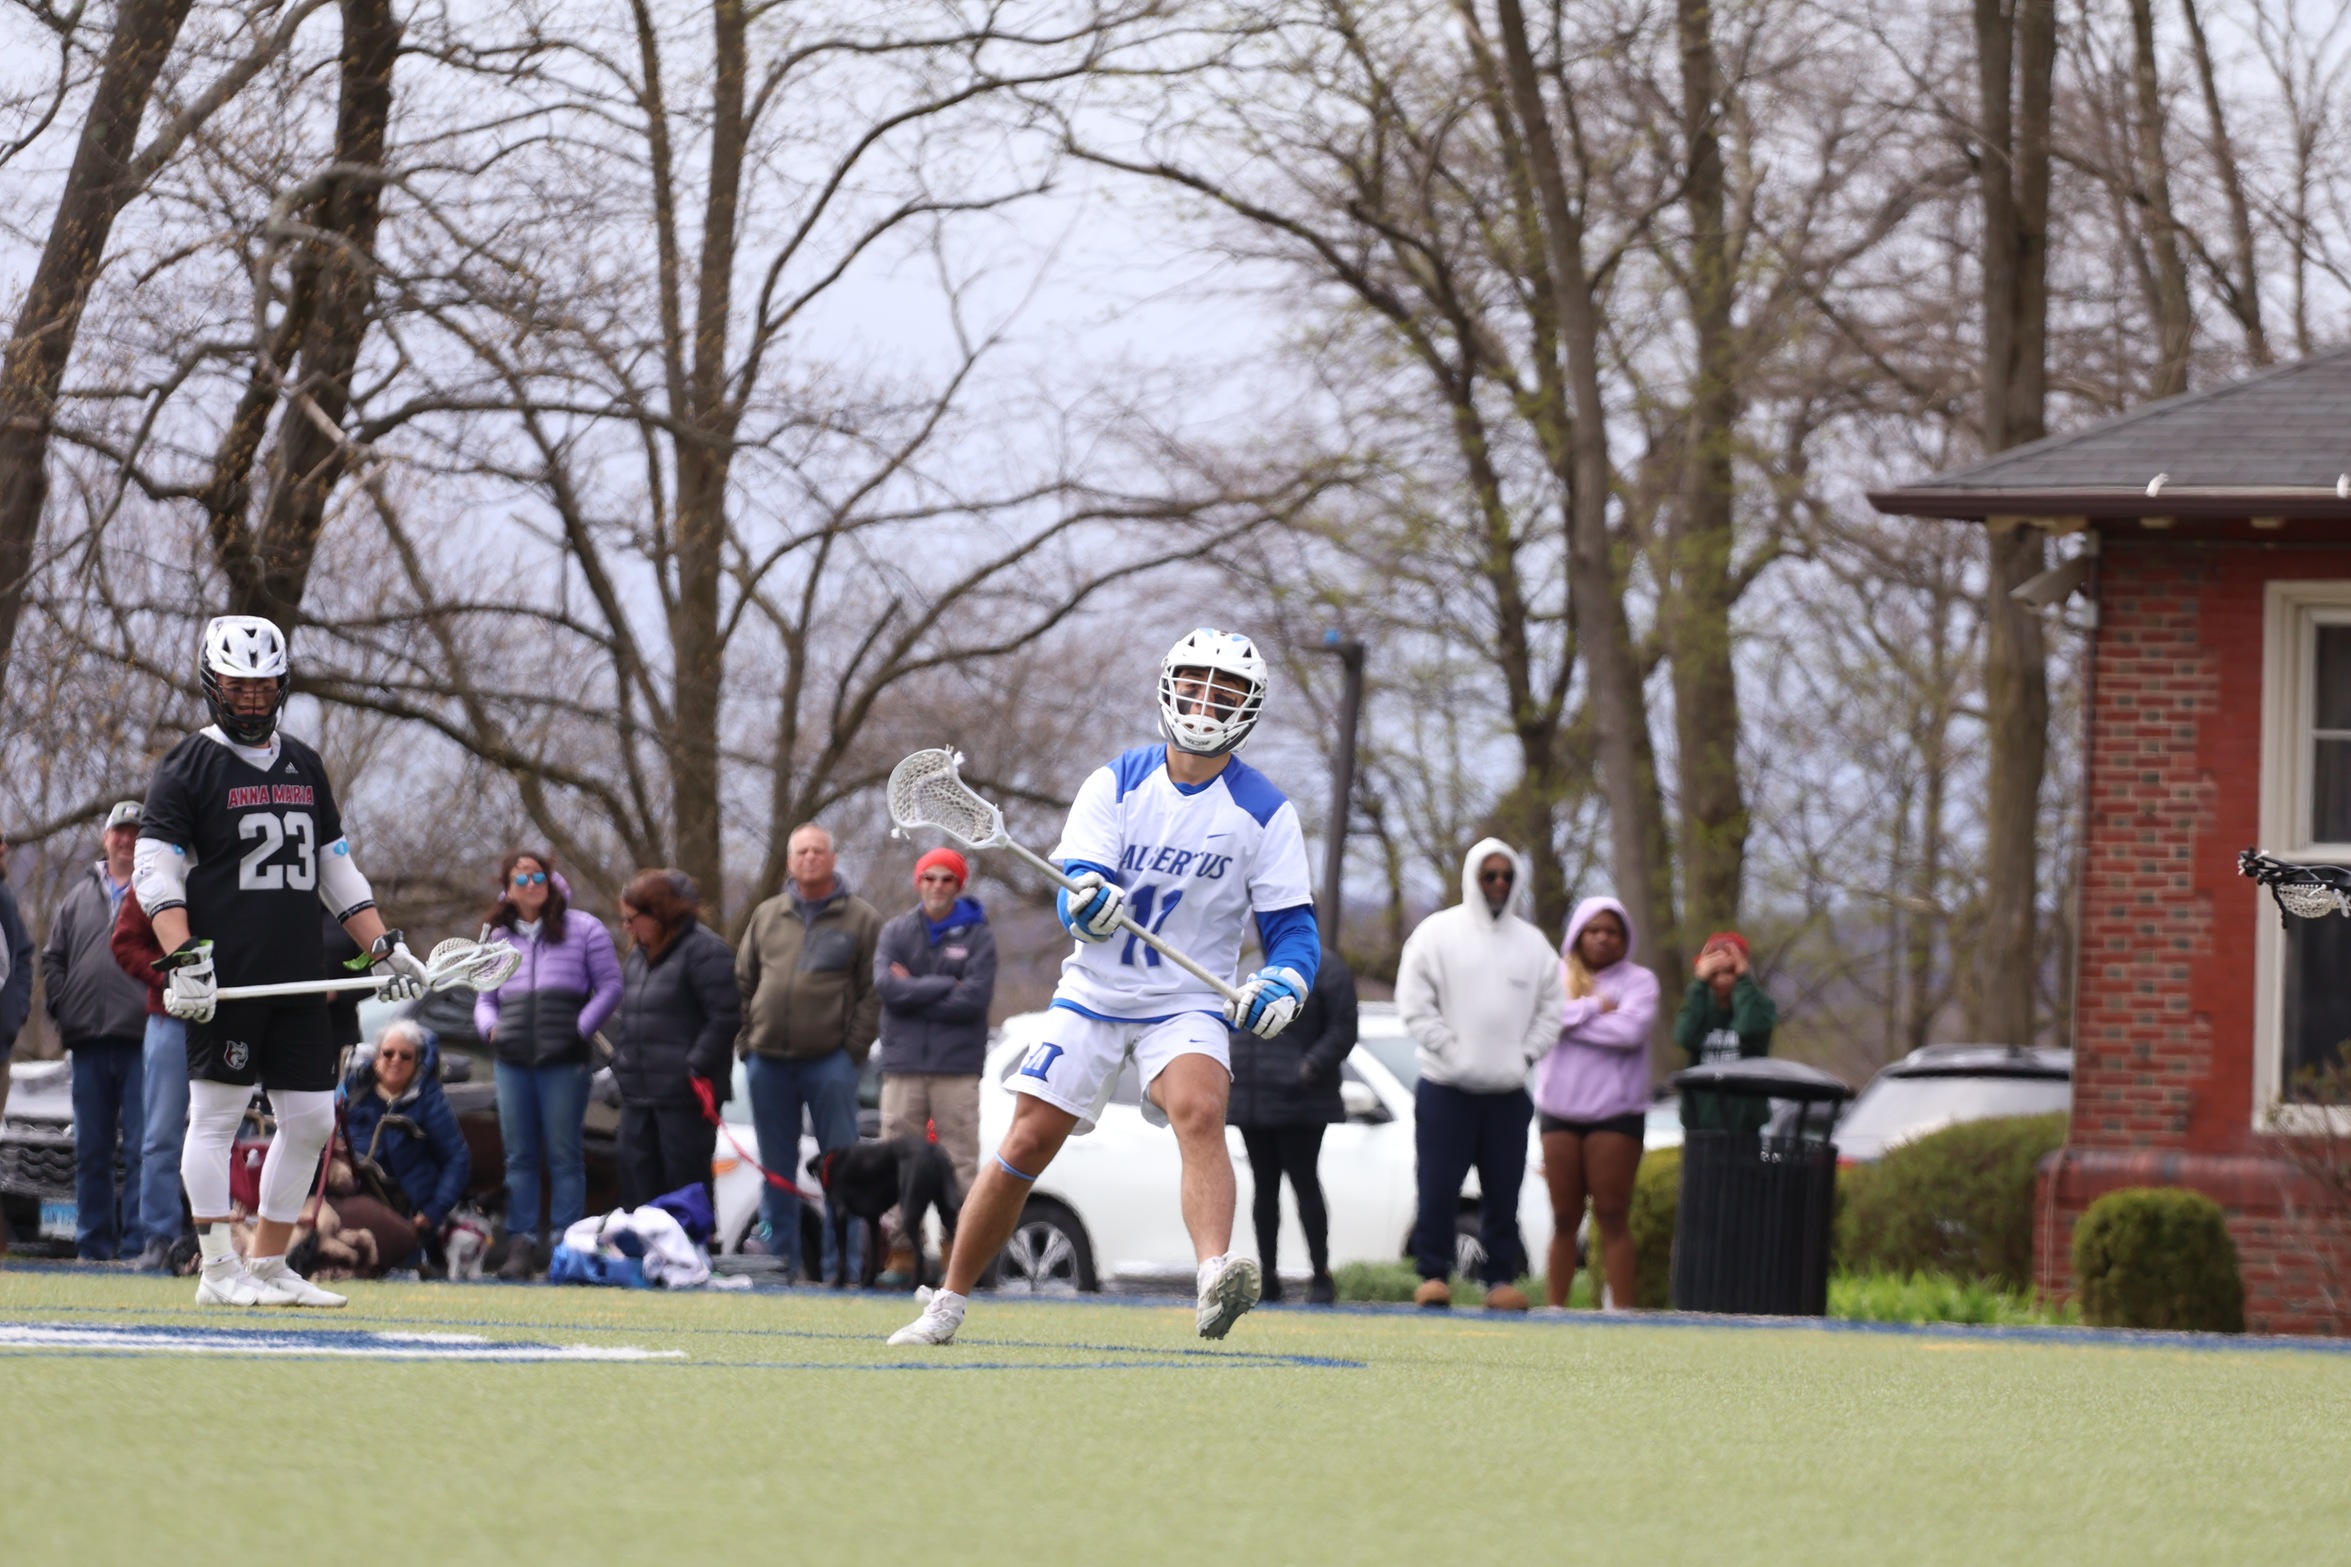 Kirwin Scores Four Times, But Men's Lacrosse Rally Falls Short On Senior Day To Anna Maria